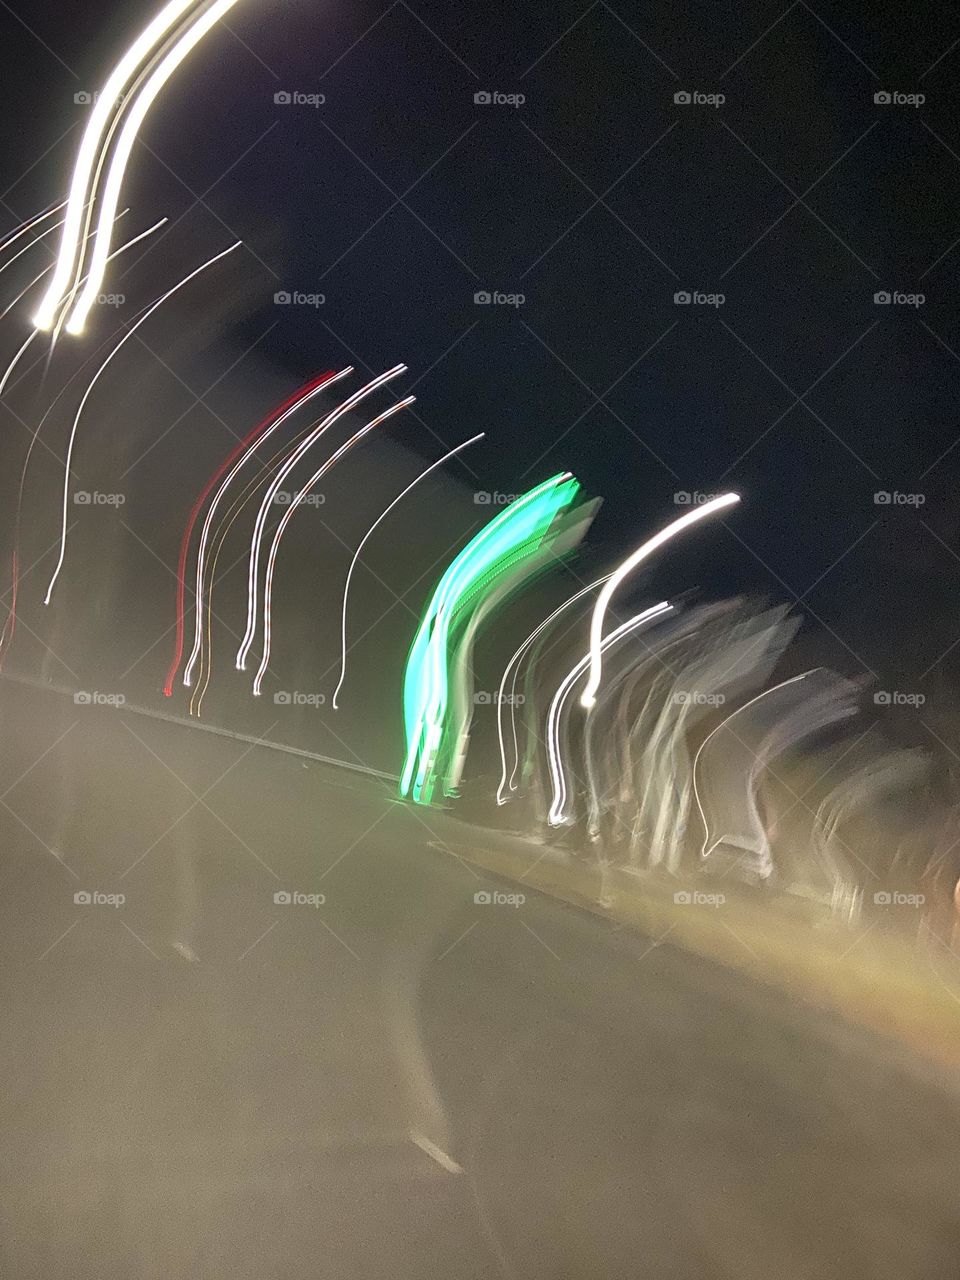 Playing around with Night Mode on a recent evening at the mall. This is a shot of EV charging stations taken at the local mall but it appears as a crazy pattern of wavy dancing lights. 